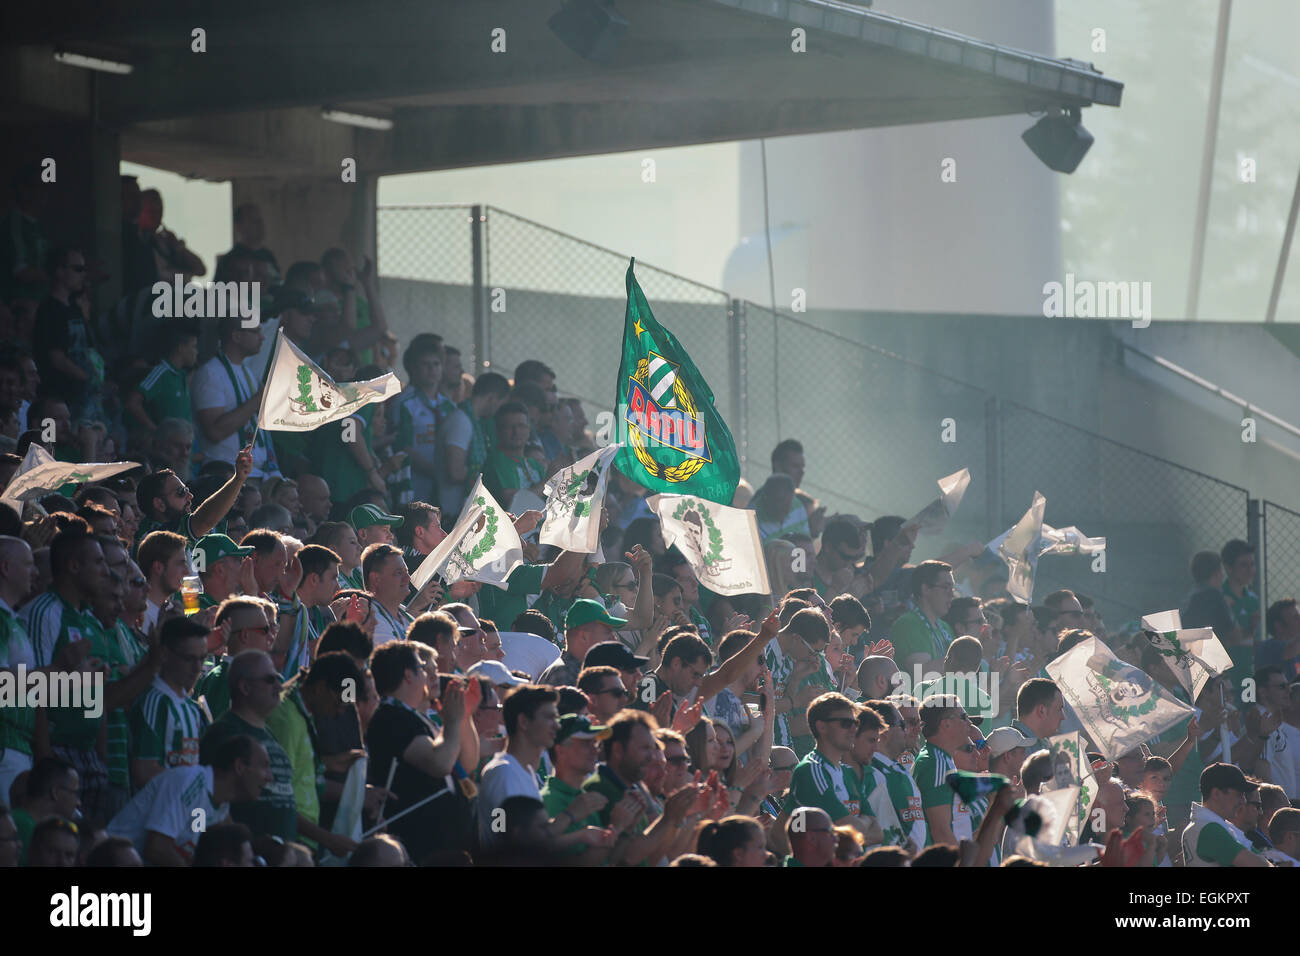 VIENNA, AUSTRIA - JULY 6, 2014: Fans of the SK Rapid celebrate the last game at Gerhard Hanappi Stadium before its demolition. Stock Photo